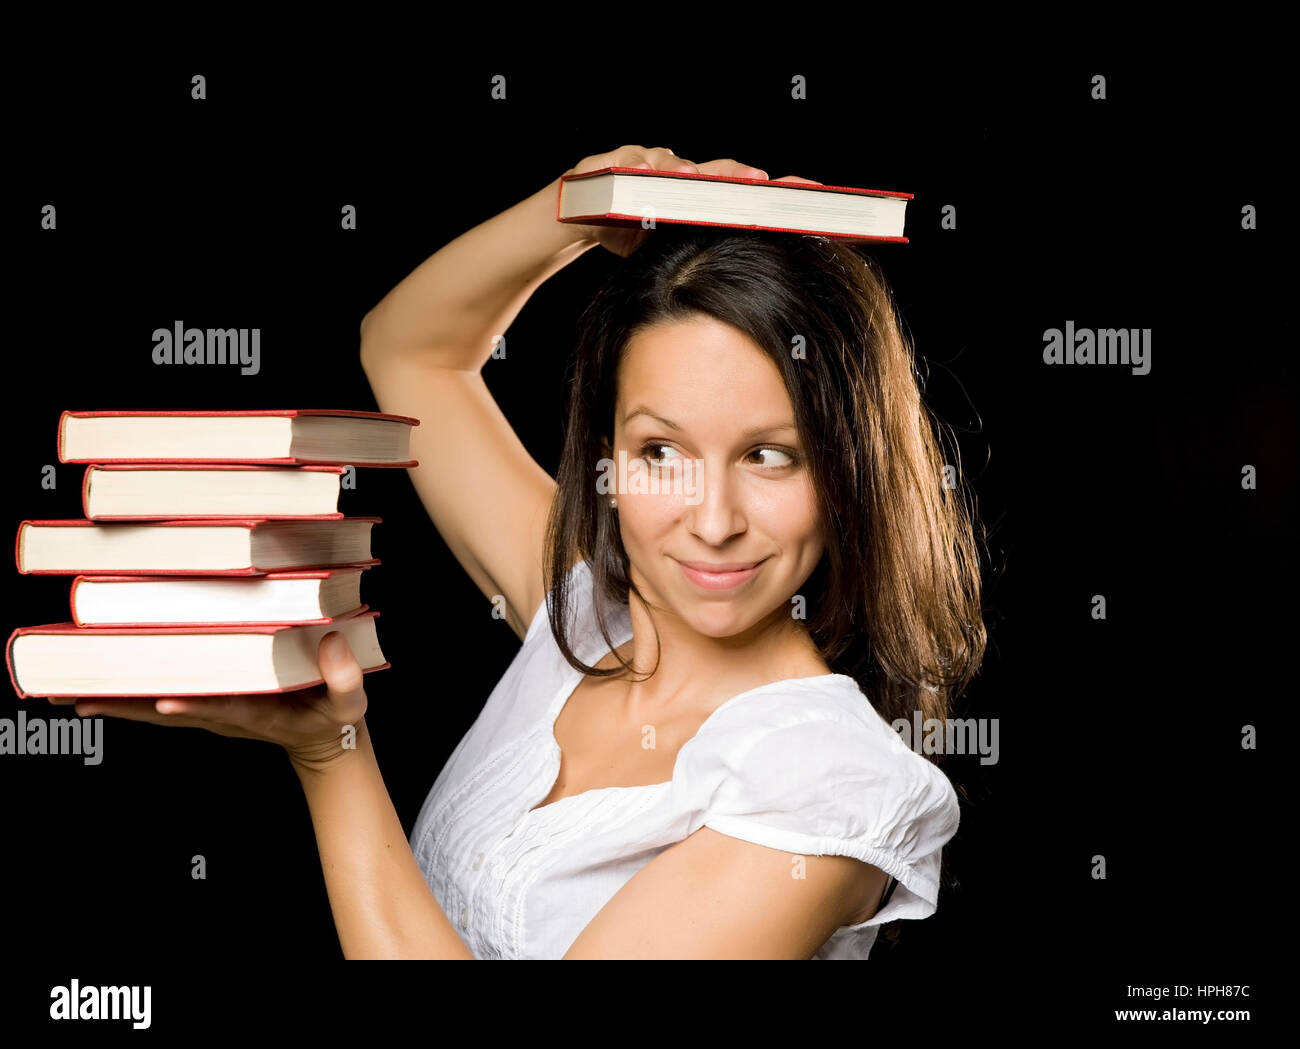 Junge Frau mit Buchstapel - woman with stack of books, Model released Stock Photo